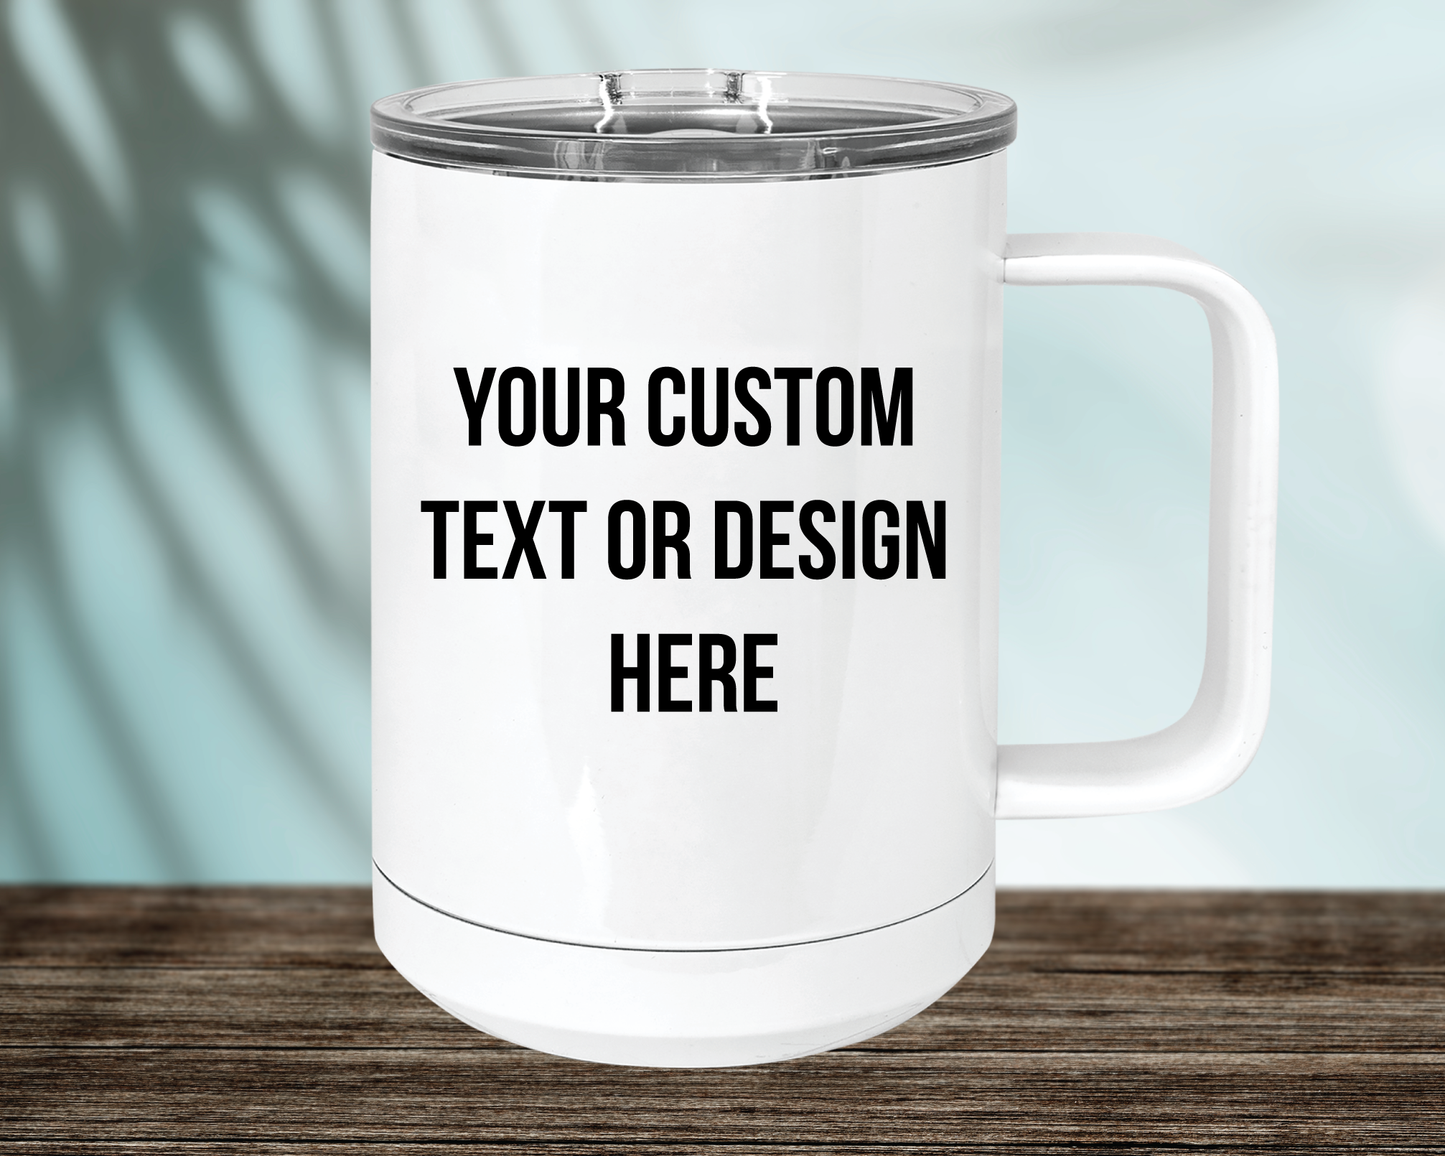 Personalized stainless steel mug with slider lid - white 15 oz